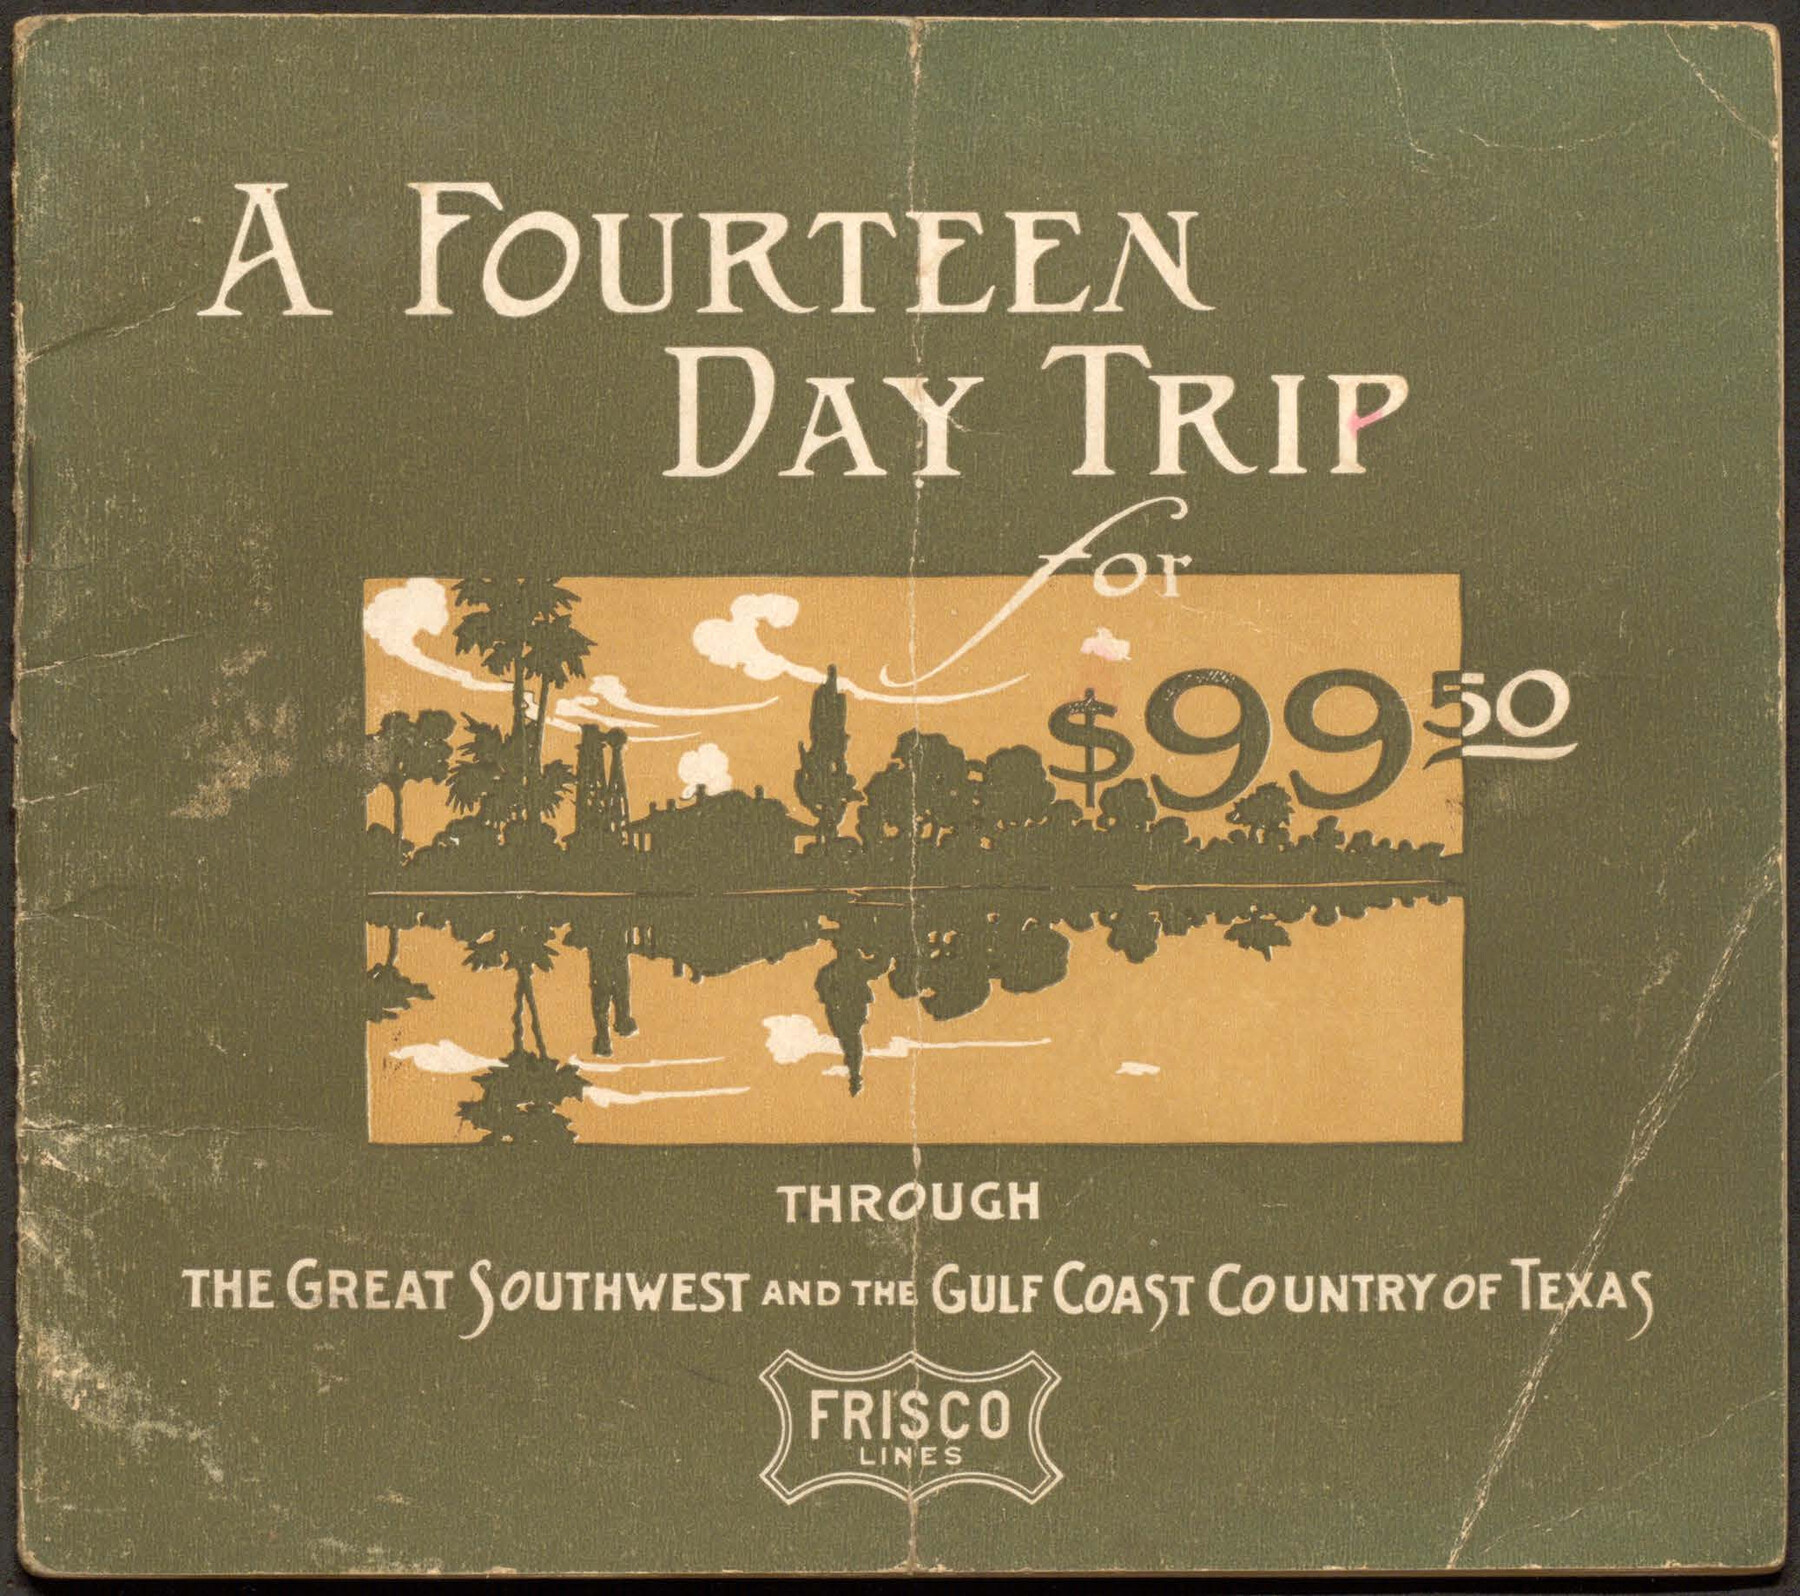 A Fourteen Day Trip for $99.50 through the Great Southwest and the Gulf Coast Country of Texas